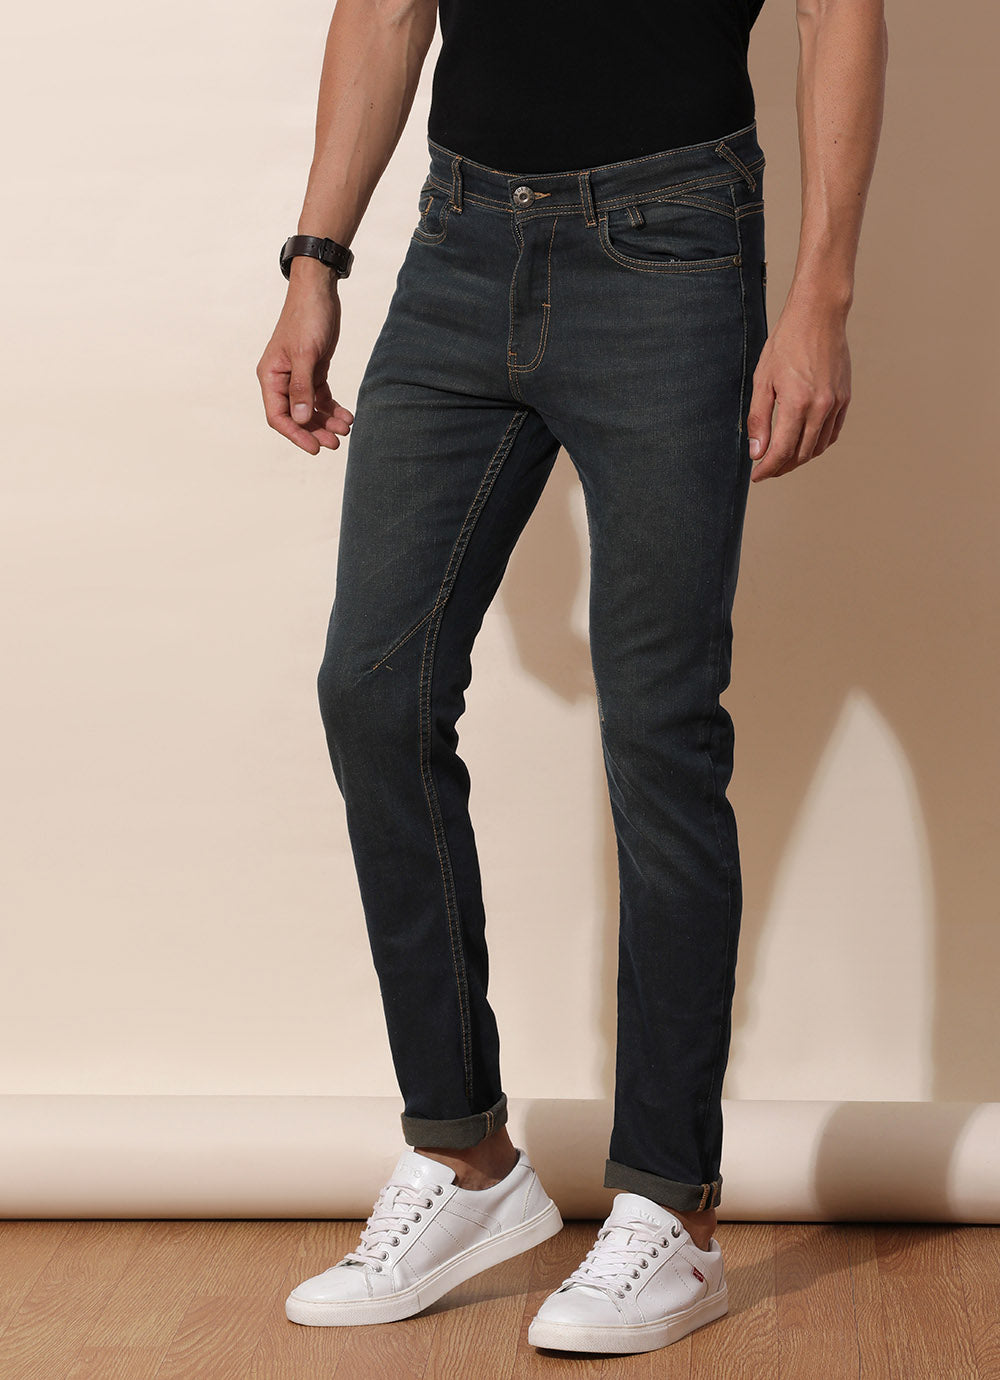 Tinted Blue Jeans with Regular Pockets made of Twill Denim